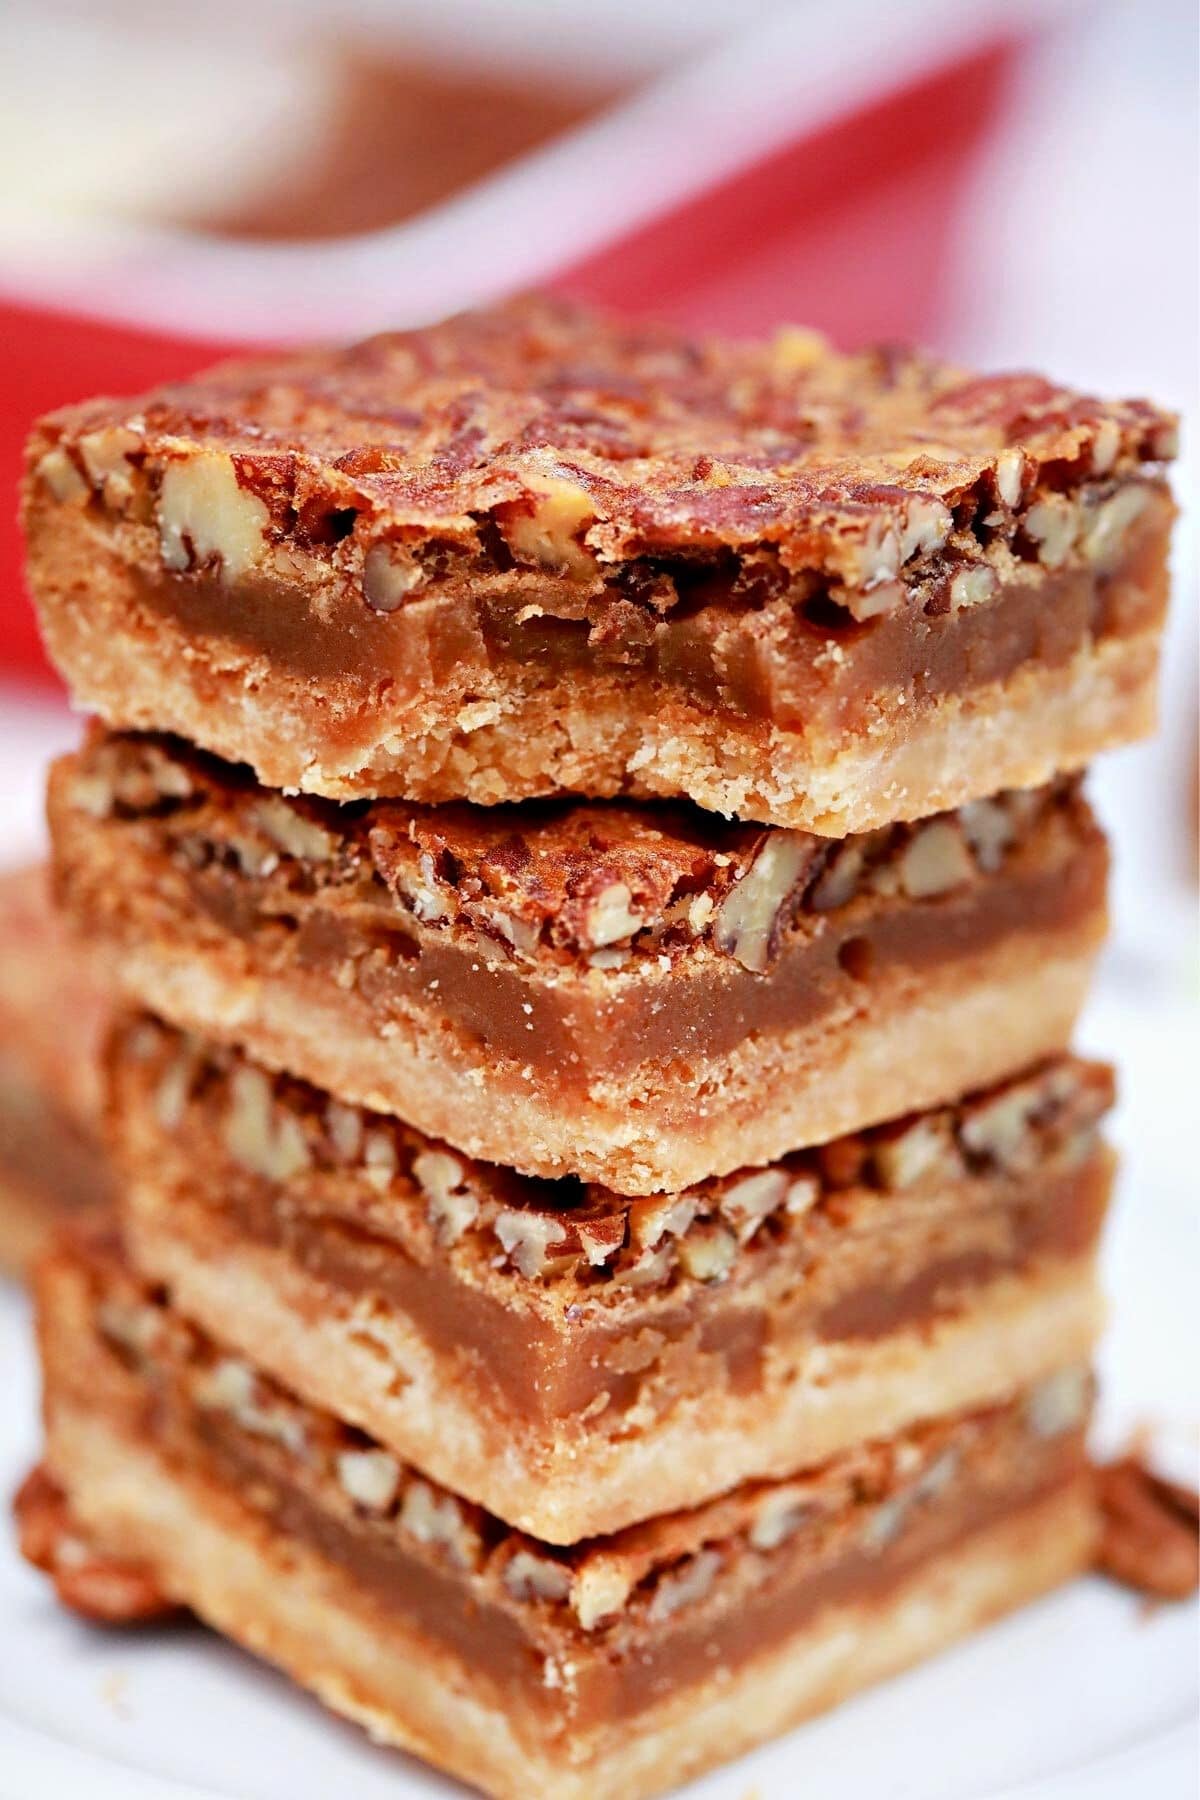 Stack of 4 pecan pie bars in front of red baking dish